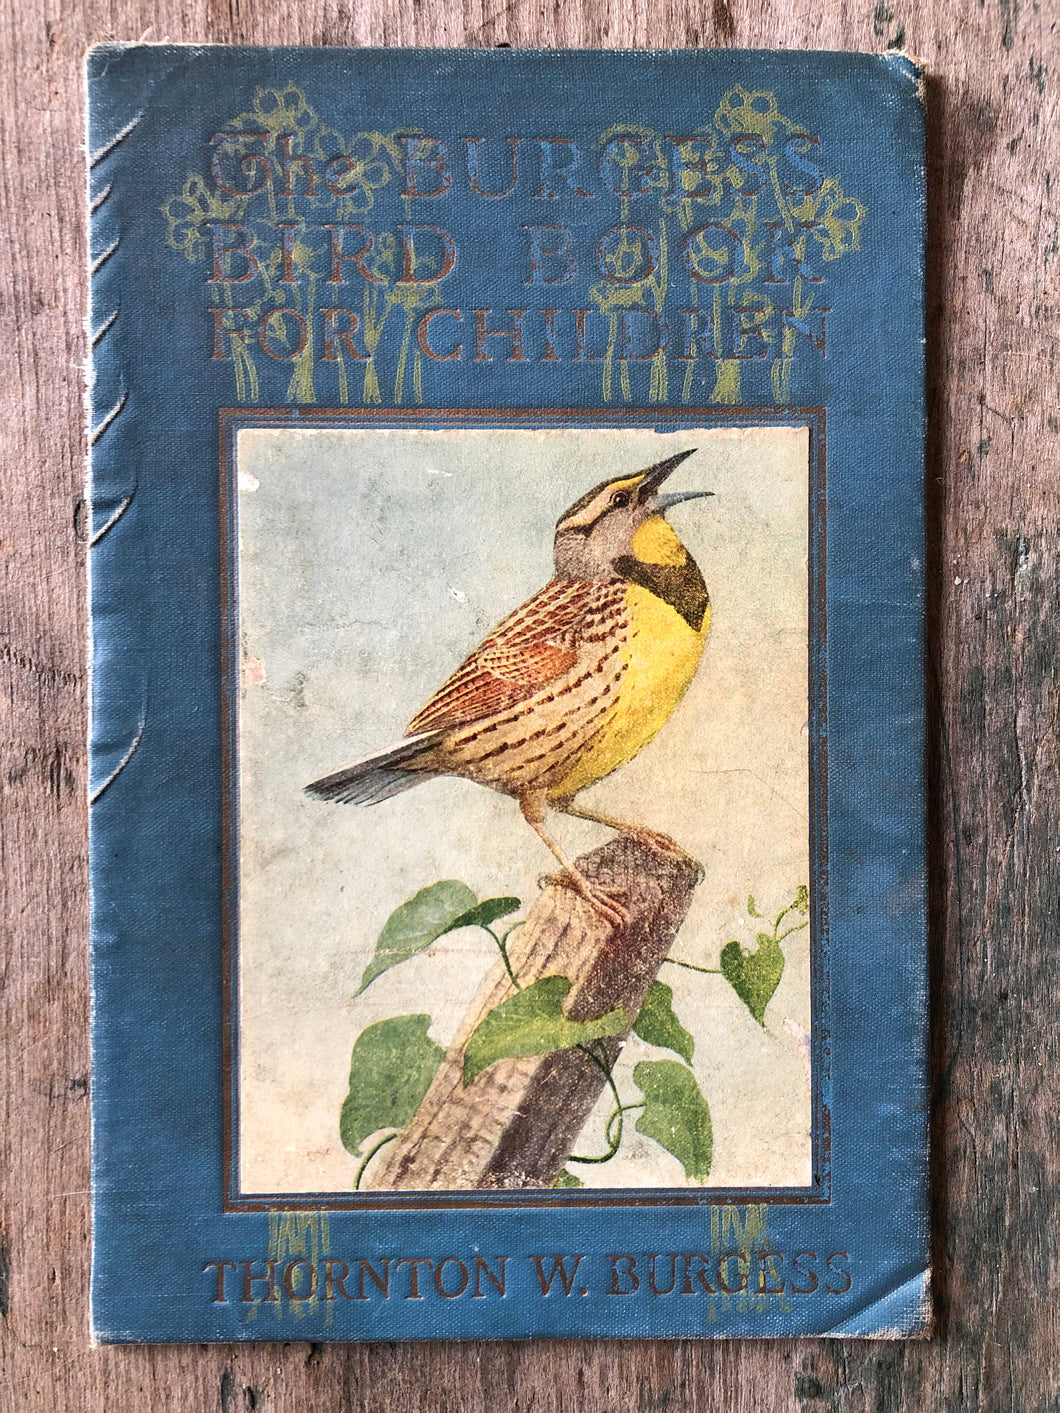 Cover of “The Burgess Bird Book for Children”